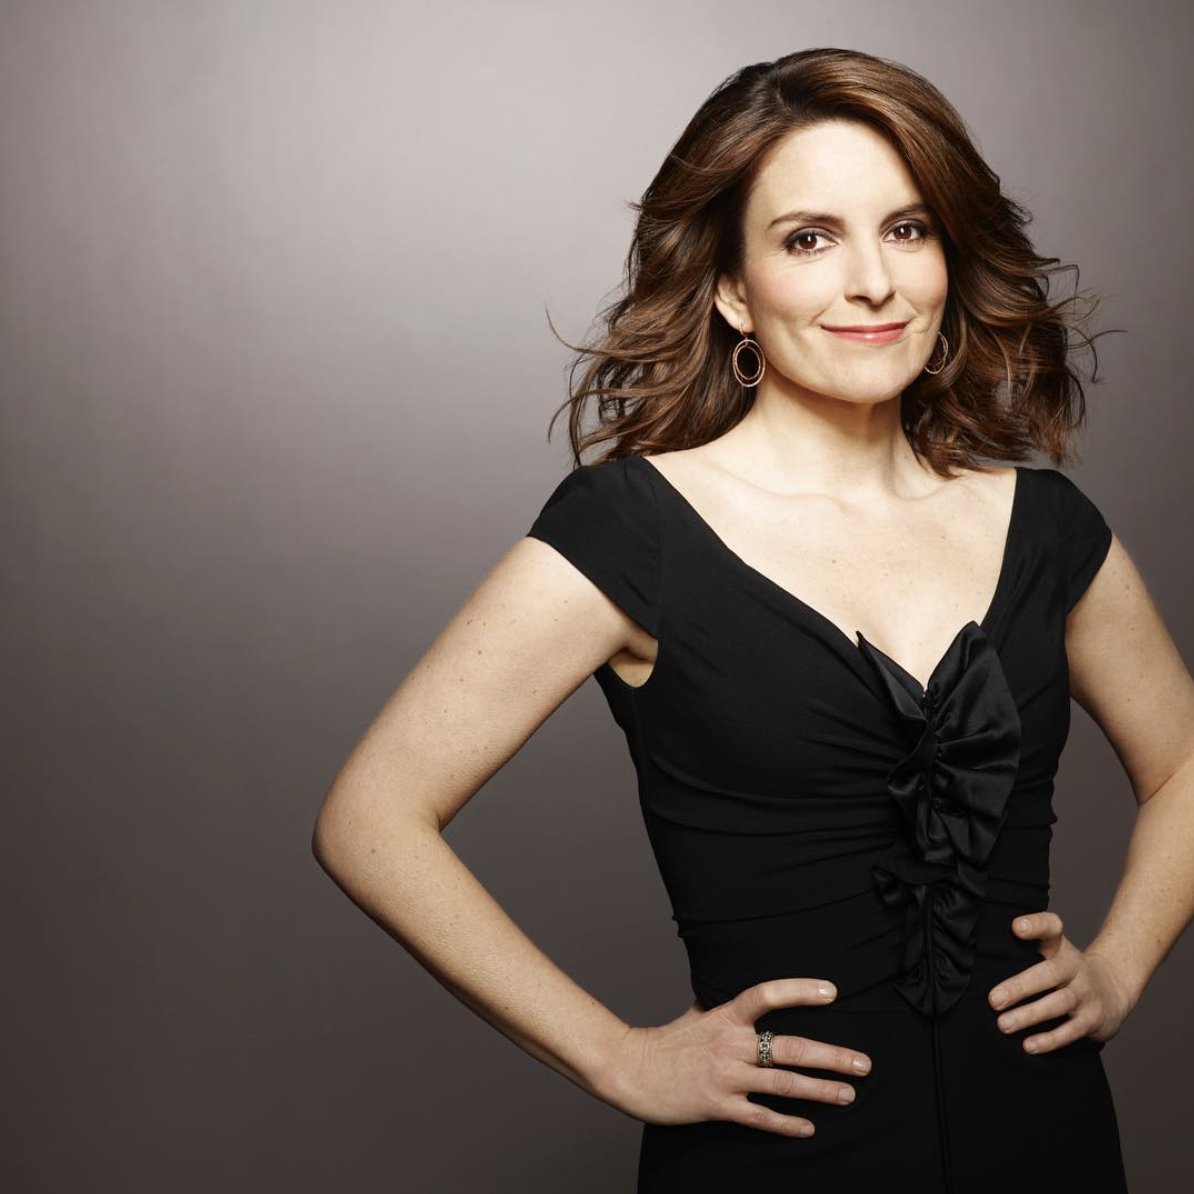 Happy Birthday Tina Fey! Thanks for being your talented, charming, witty self!  